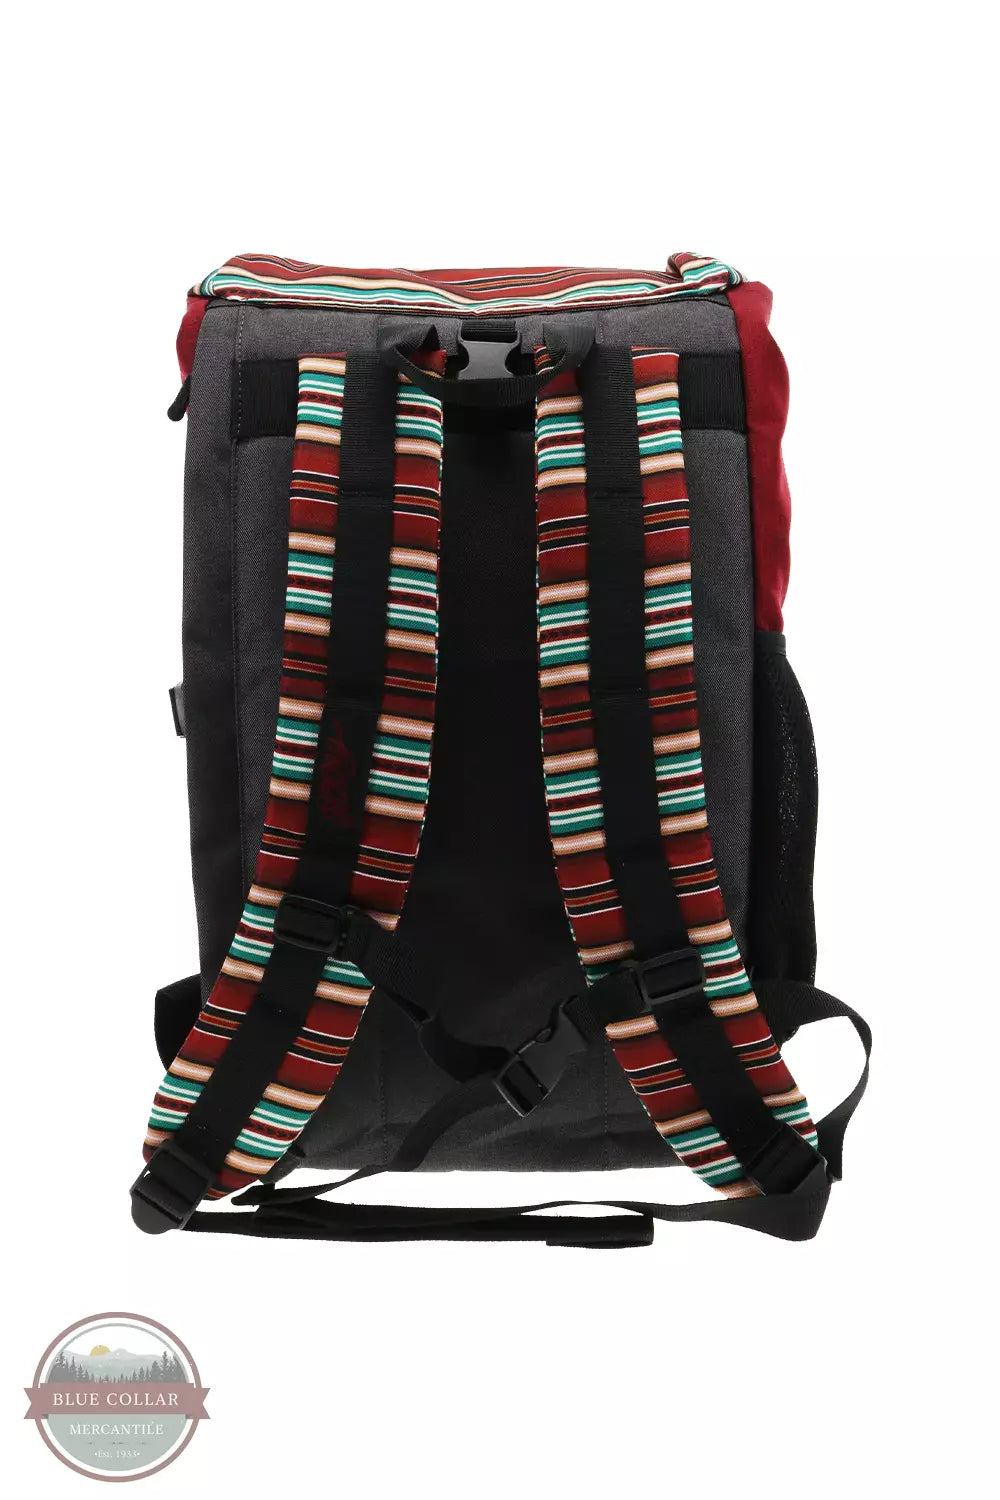 Hooey BP053BUSP Topper Backpack in Maroon with Serape Pattern and Black Accents Back View